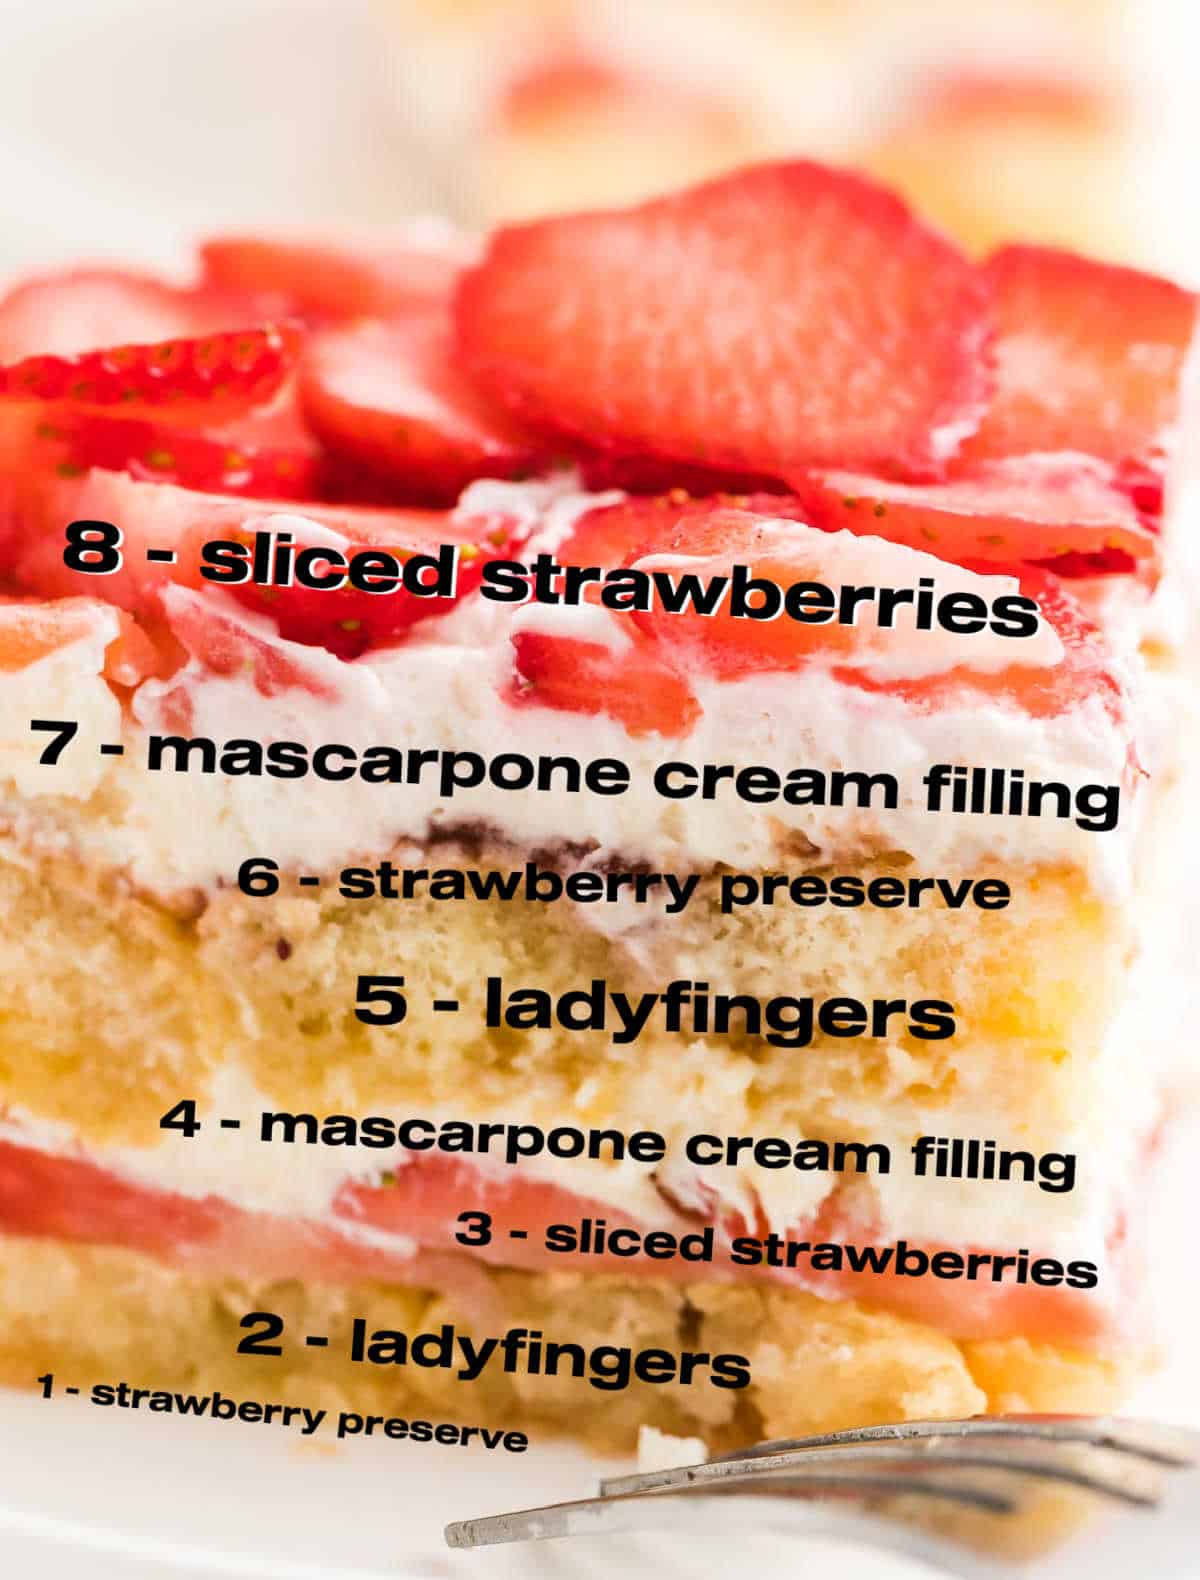 labeled layers showing the order of how to assemble a strawberry tiramisu